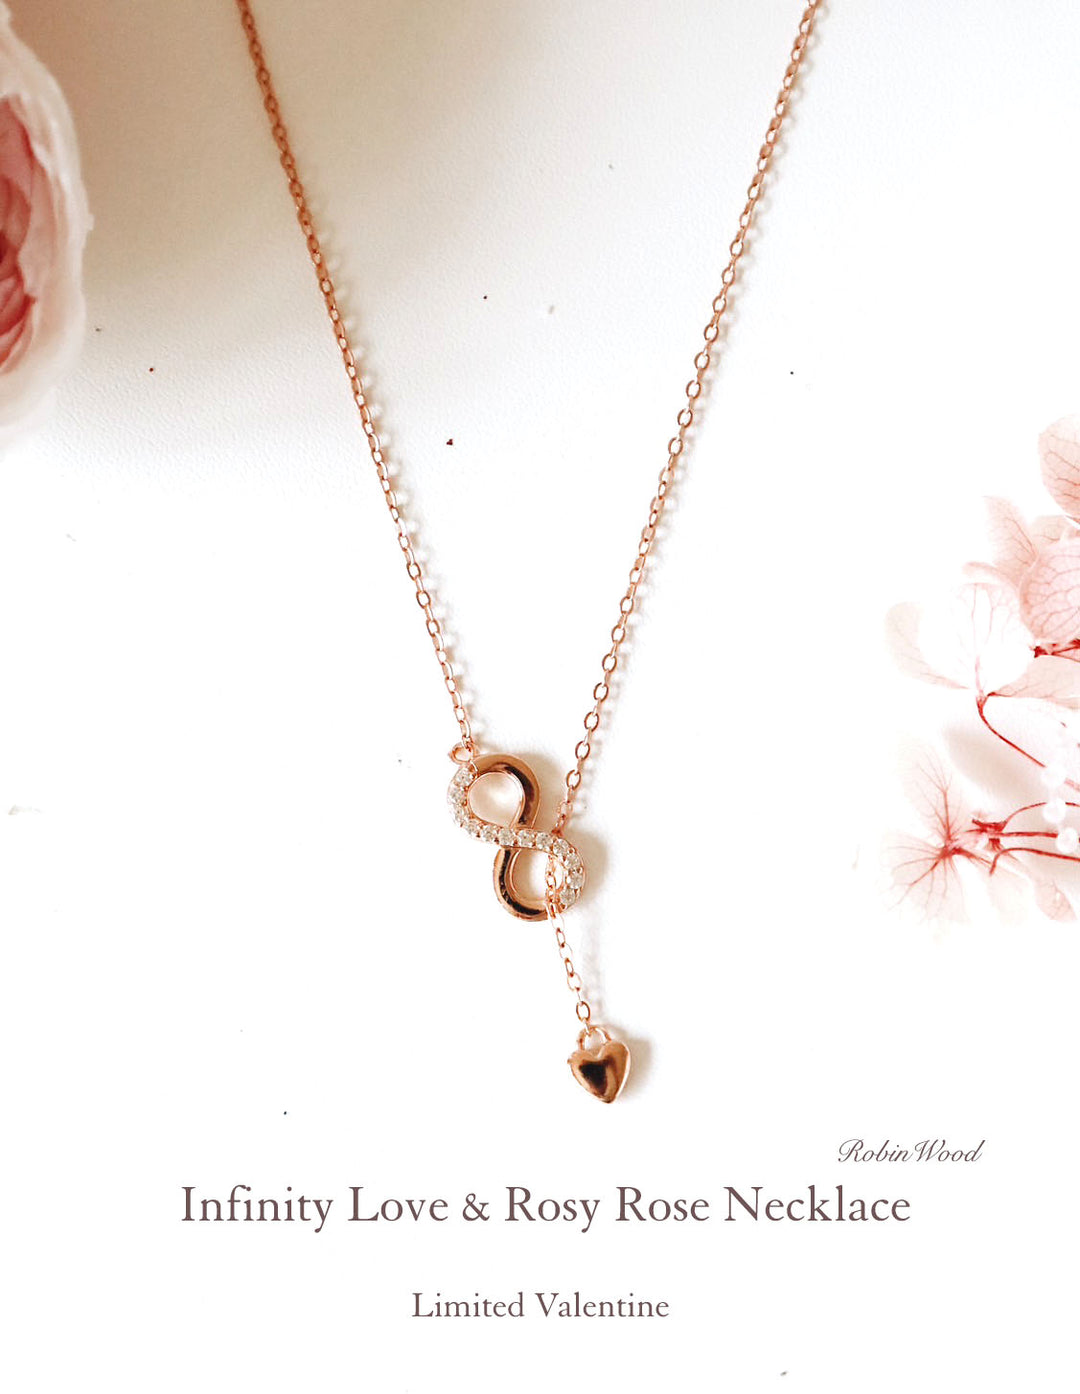 LIMITED VALENTINE COLLECTION'S " INFINITY LOVE & ROSY ROSE Adjustable size NECKLACE, ROBINWOOD MASTERPIECES